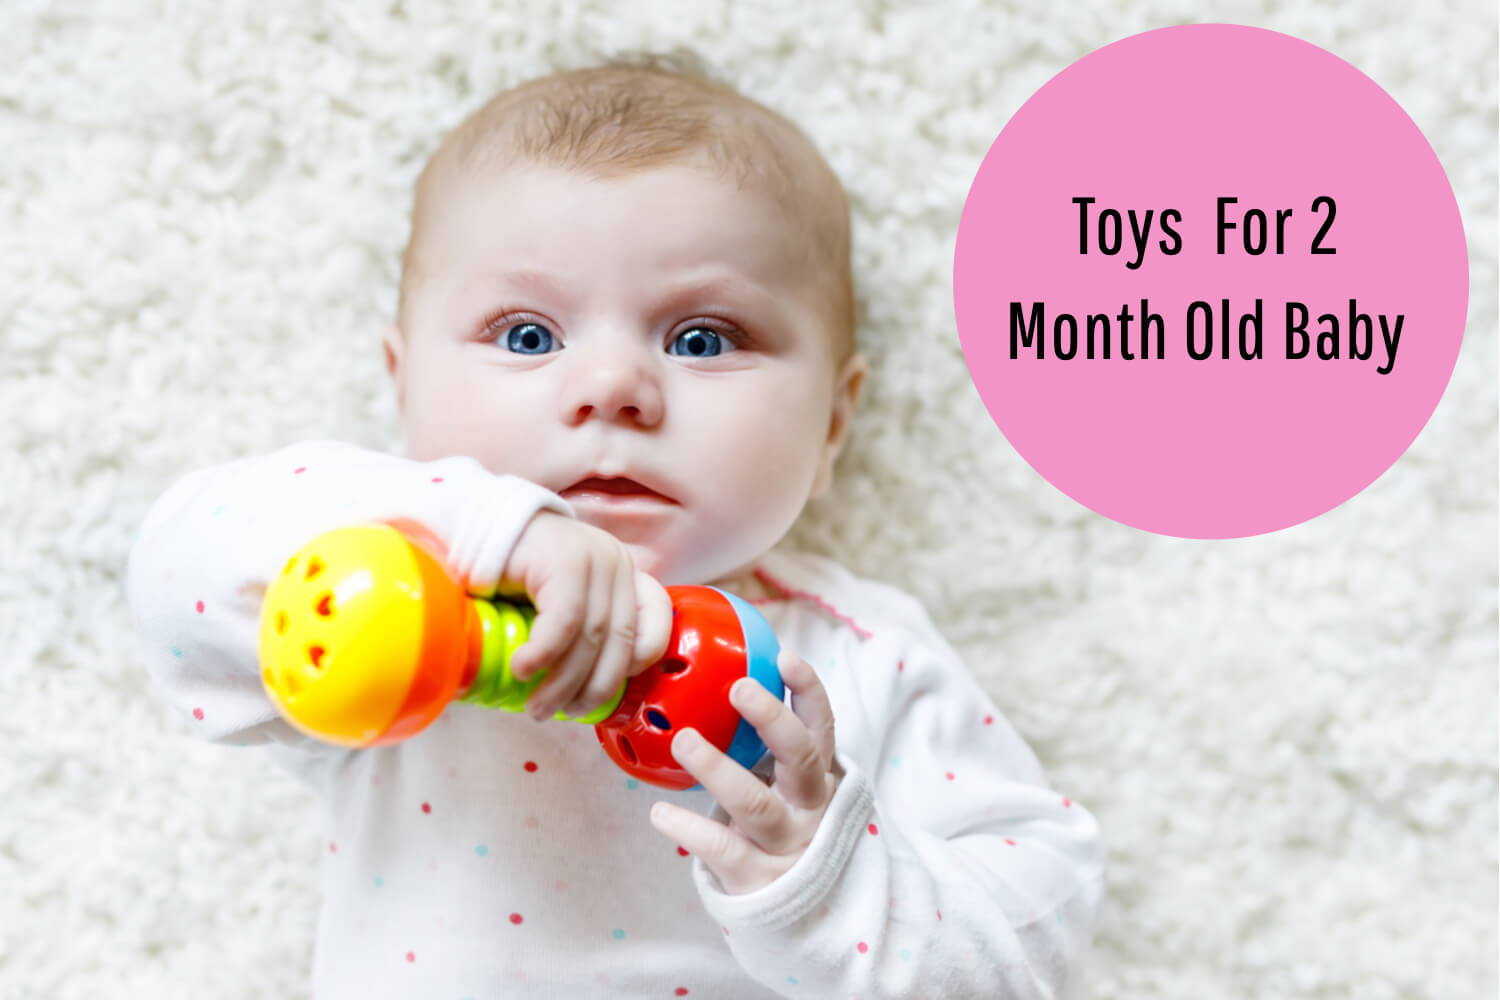 Toys For 2 Month Old Baby